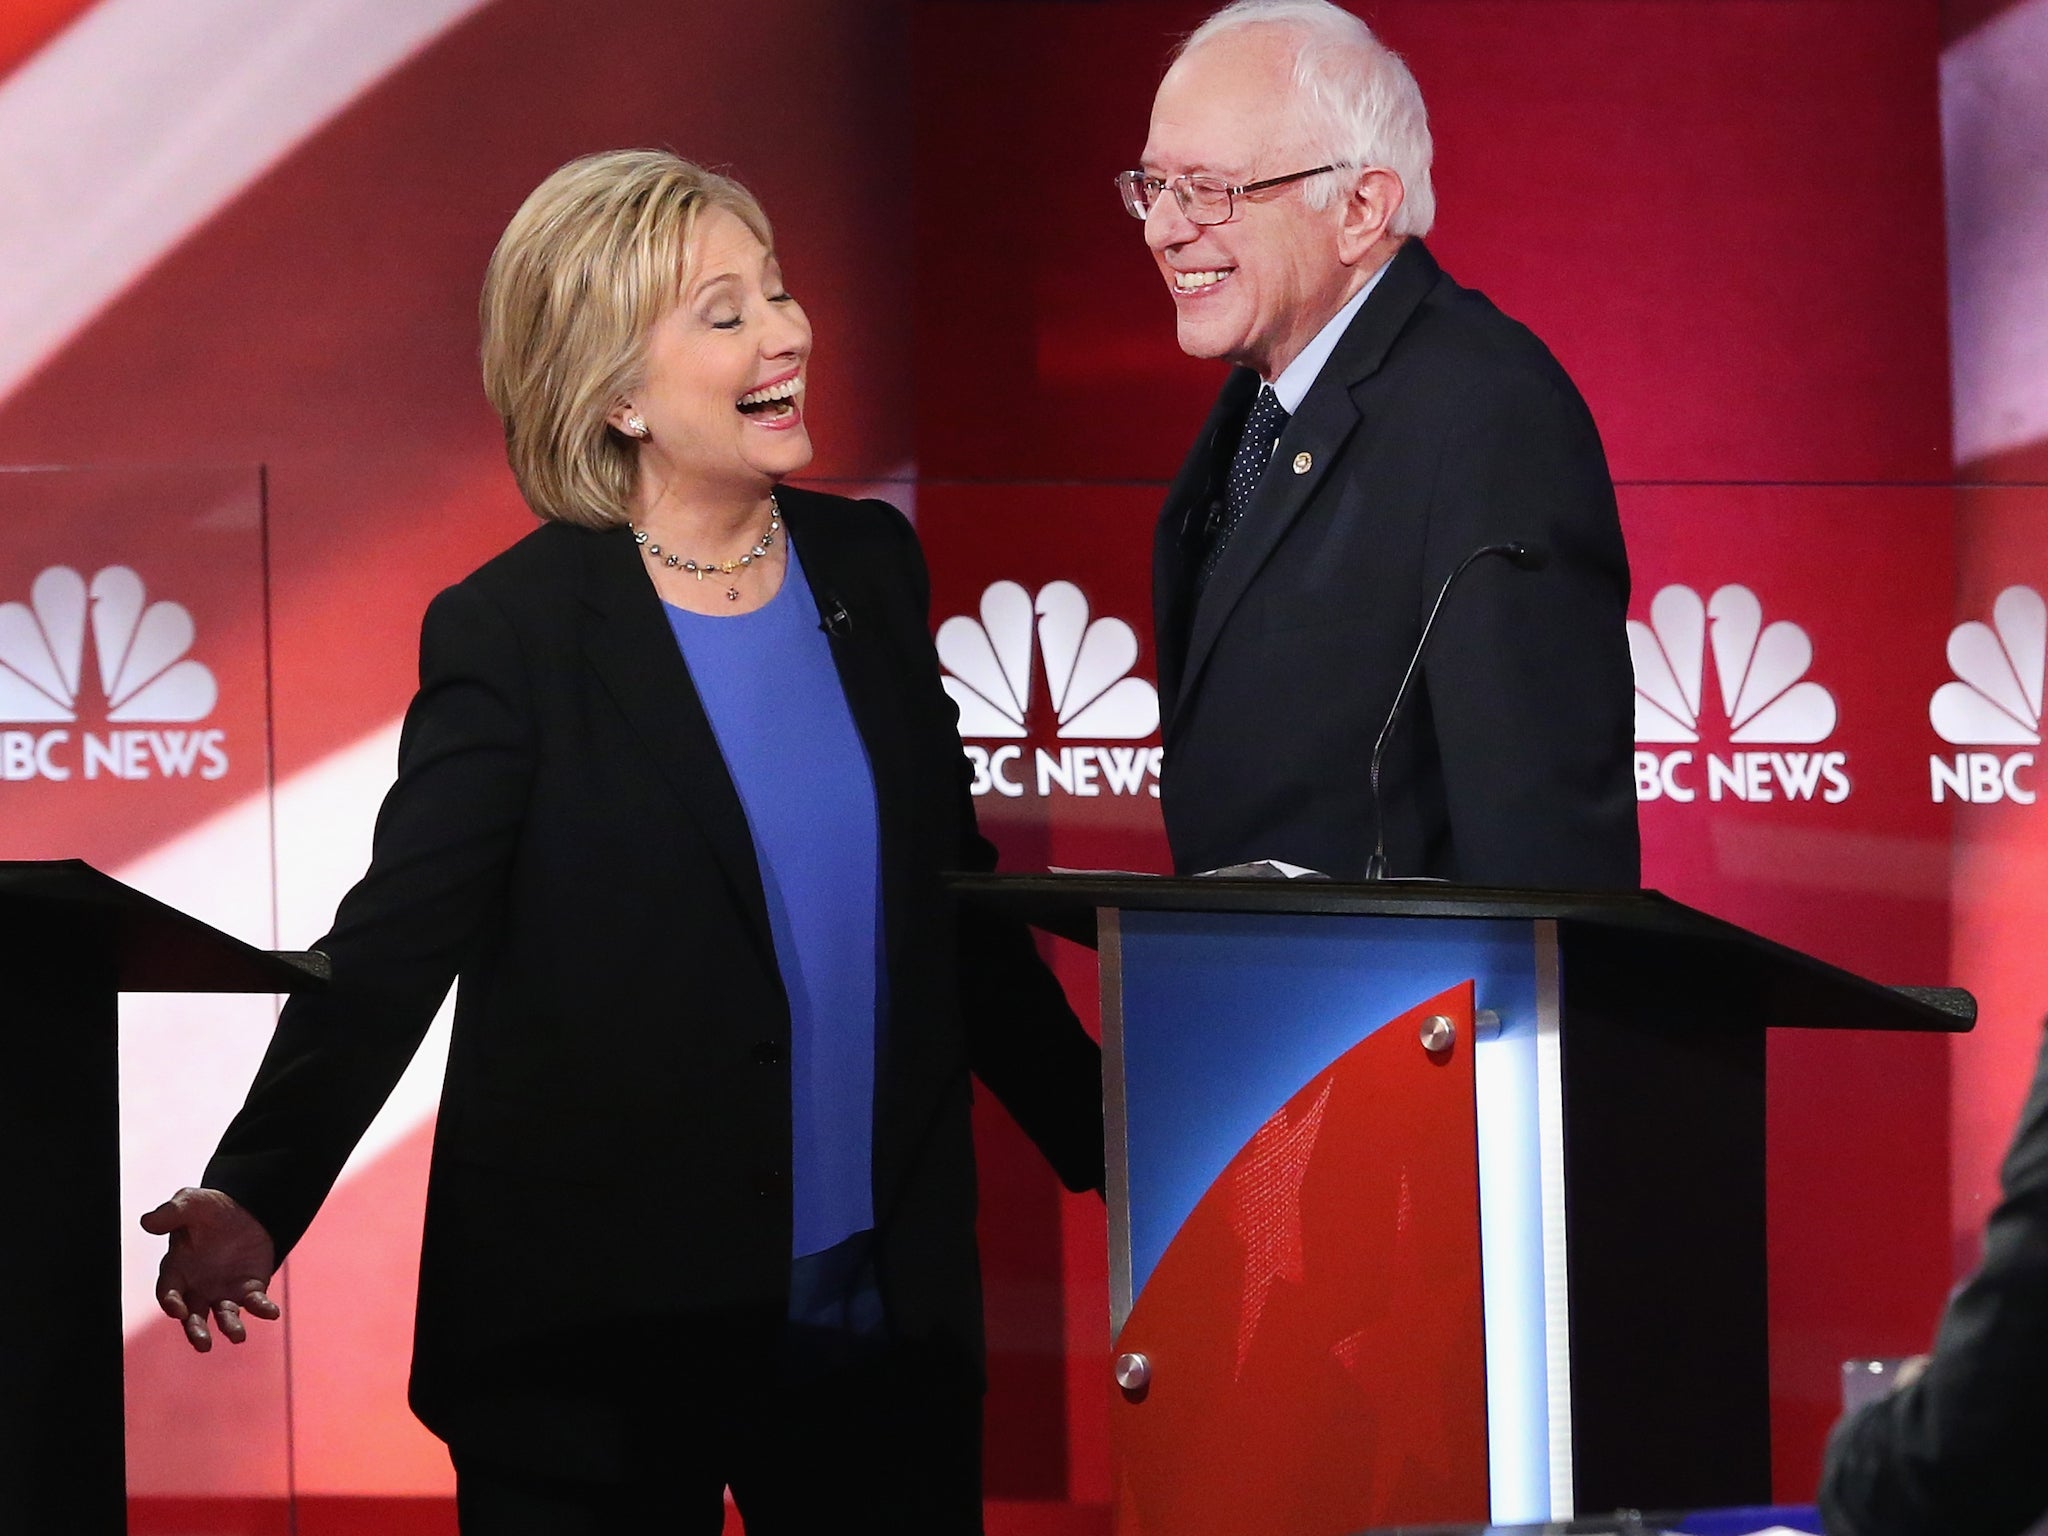 Hillary Clinton and Bernie Sanders have been squabbling about who has a more progressive record.